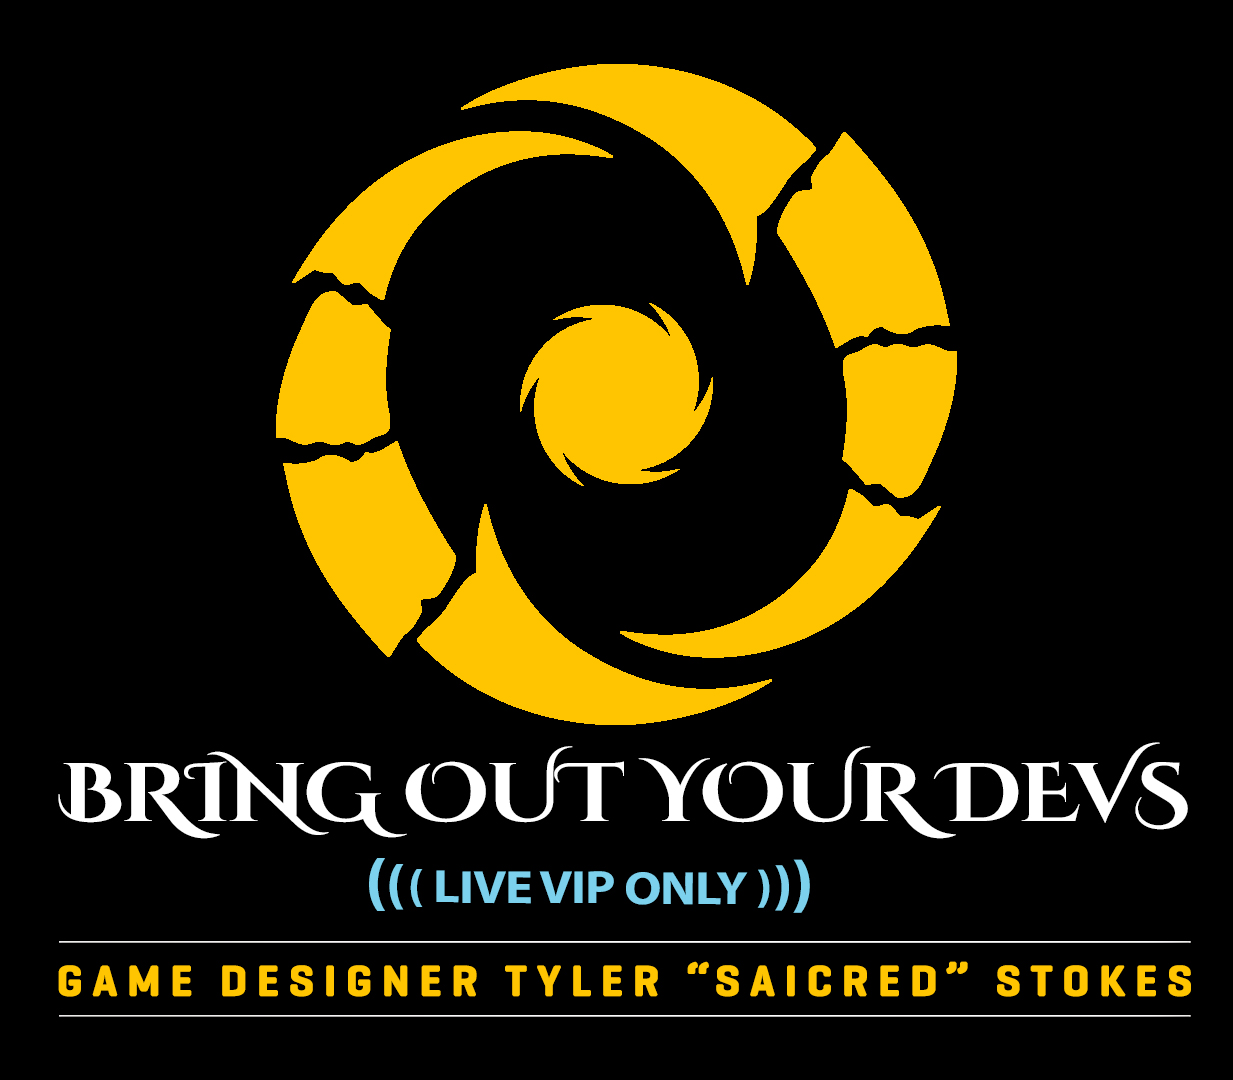 2022-Jan 5: promo for Bring Out Your Devs podcast with modified Pantheon logo